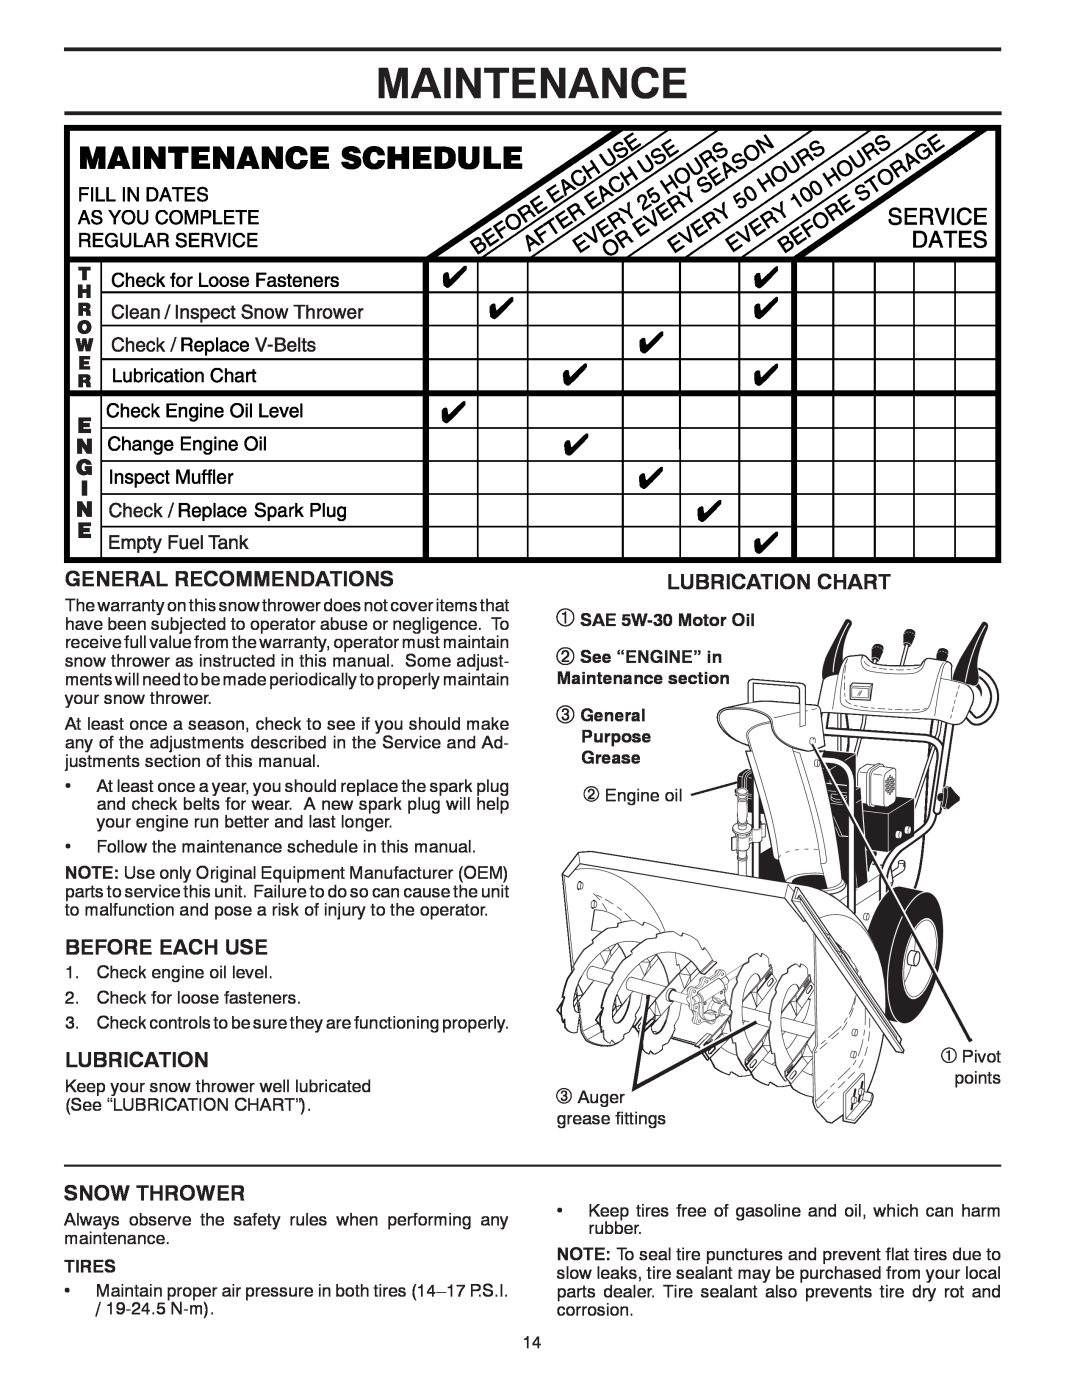 Poulan PP13TEPH30 Maintenance, General Recommendations, Before Each Use, Lubrication Chart, Snow Thrower, Tires 